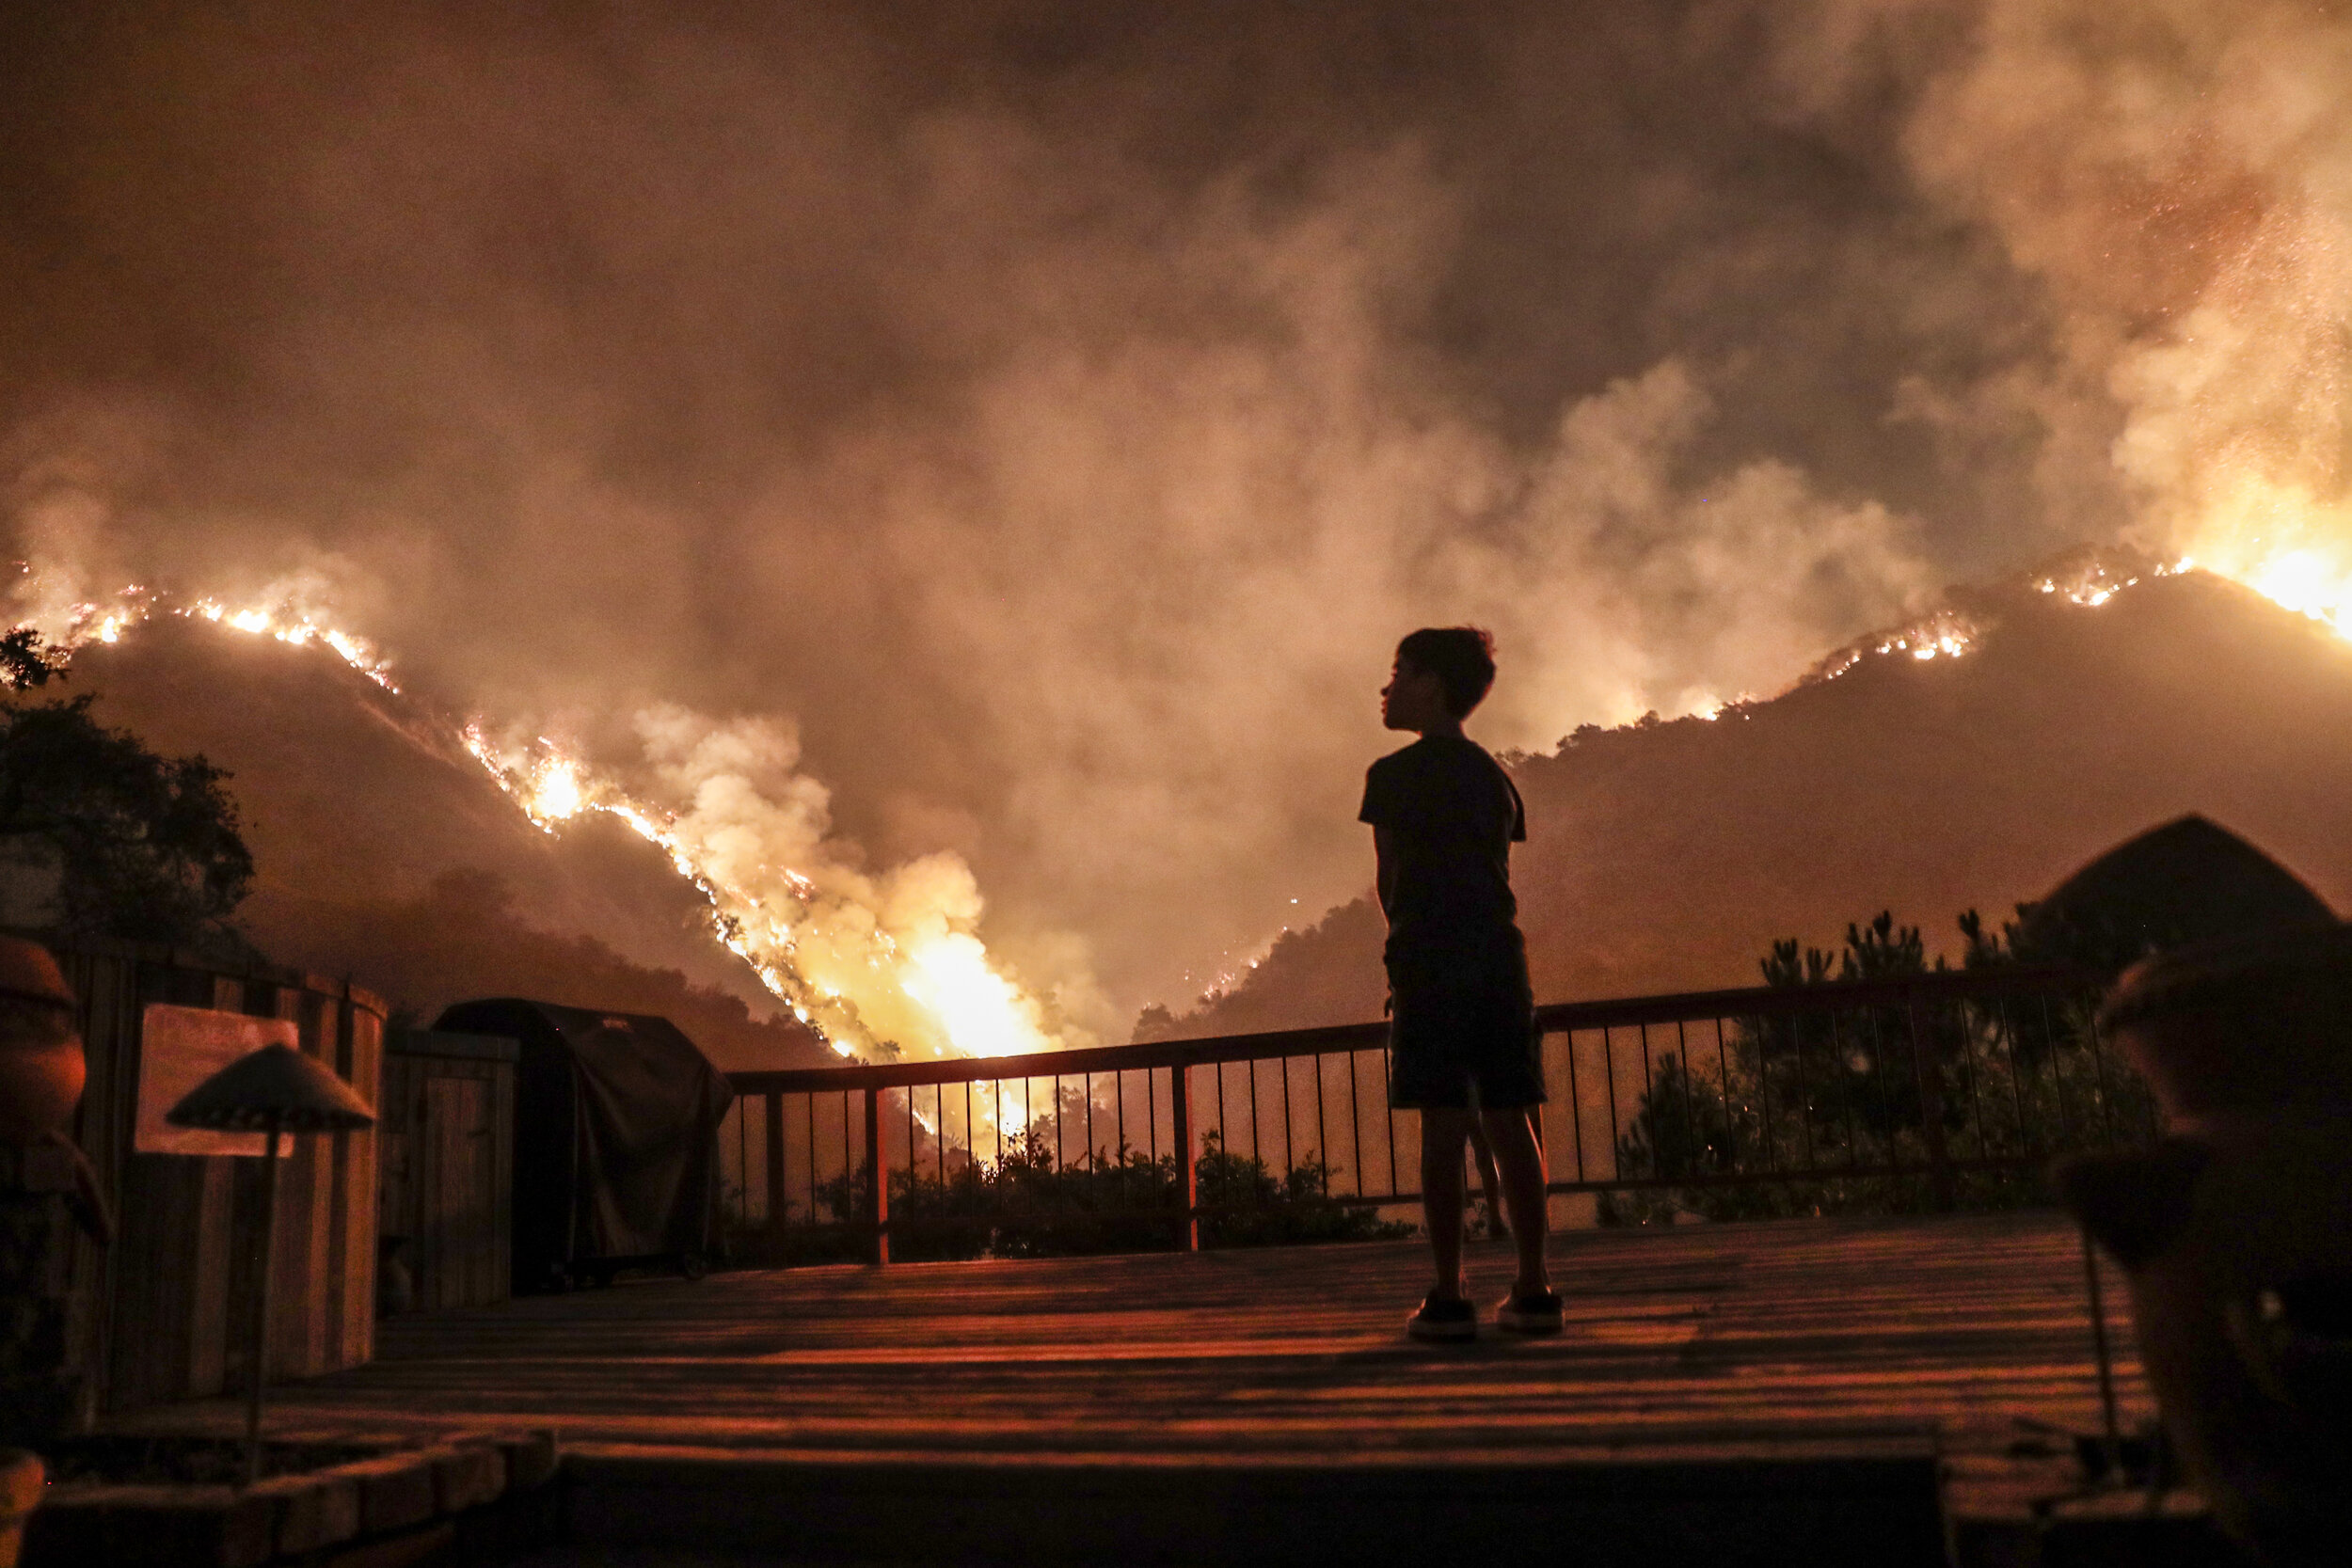  Monrovia, CA, September 15, 2020 - Castle Snider, 8, looks on as flames engulf the hillsides behind his backyard as the Bobcat Fire burns near homes on Oakglade Dr.   